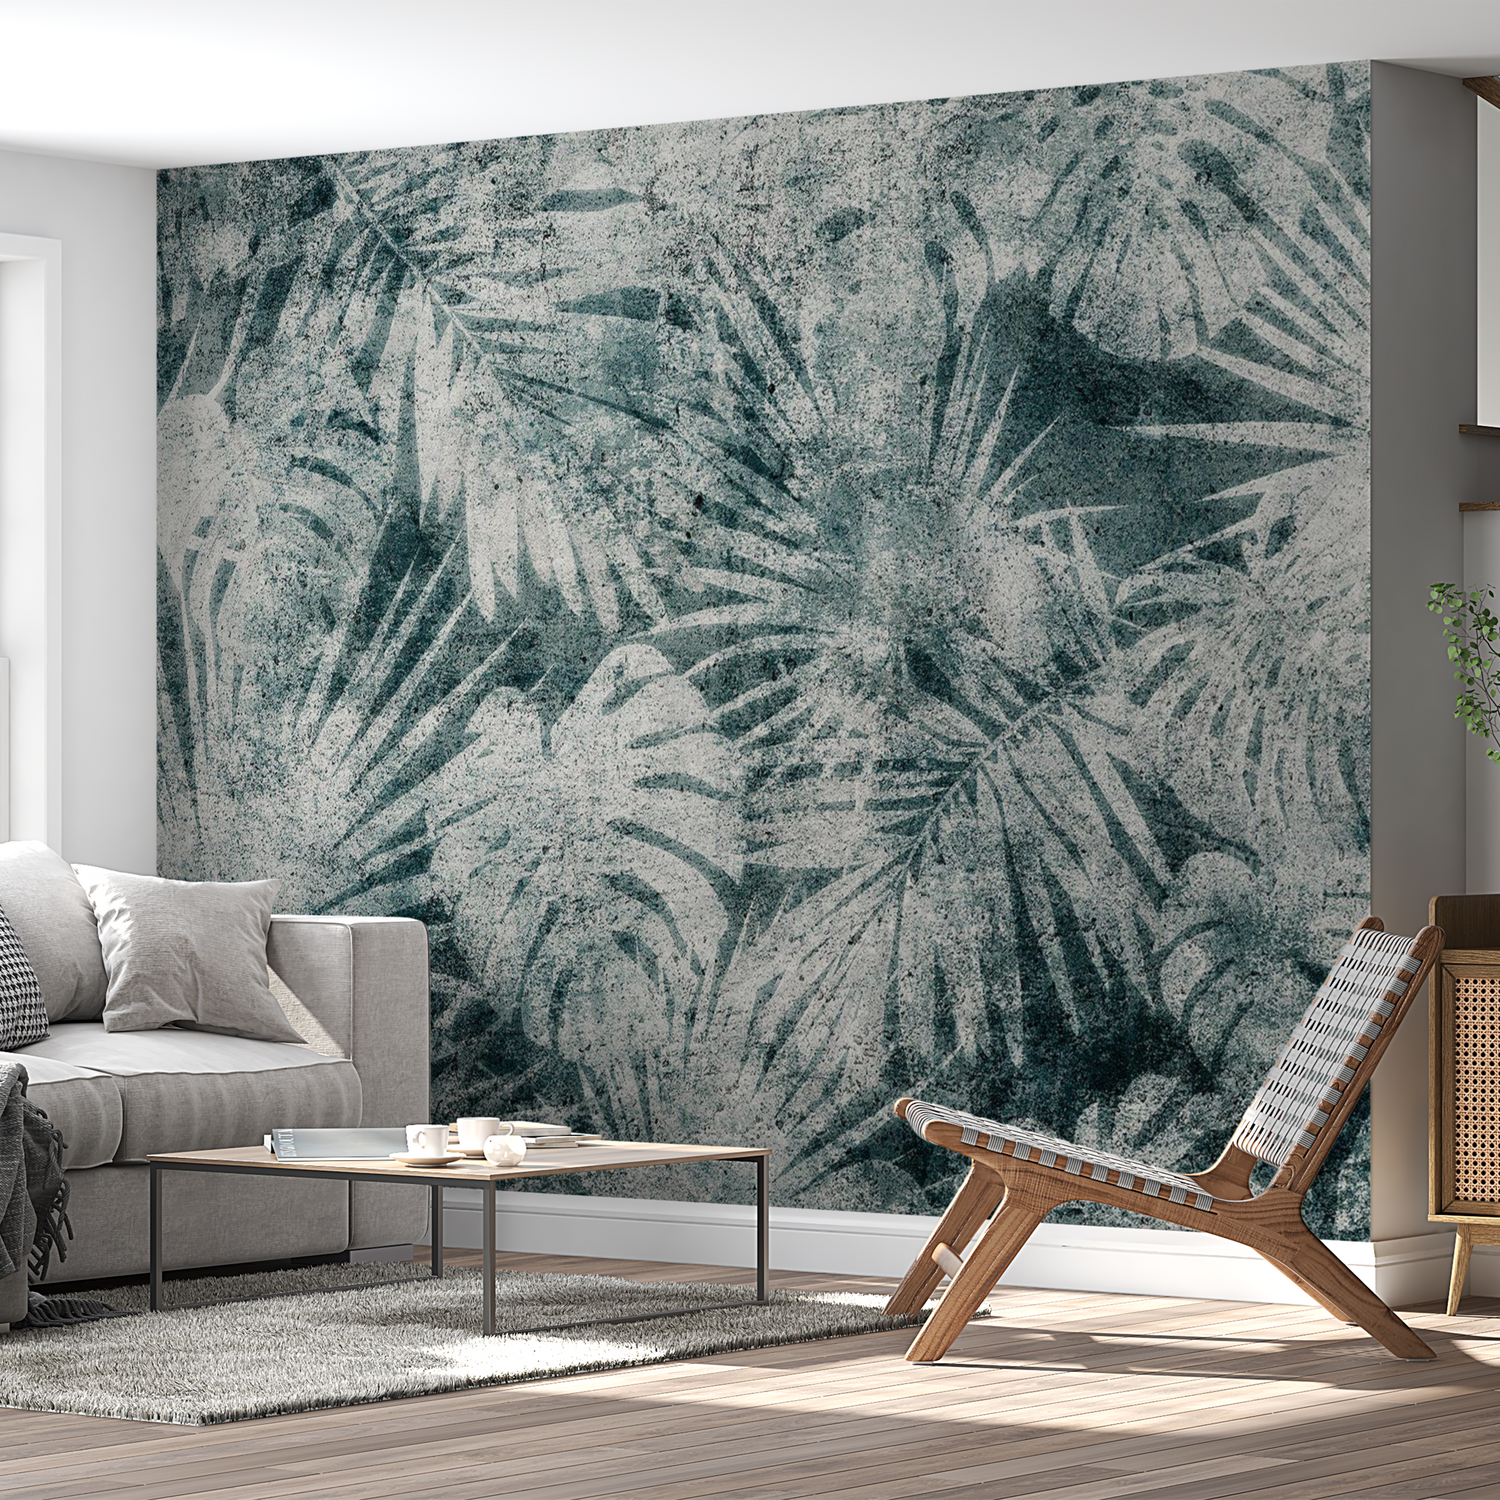 Peel & Stick Botanical Wall Mural - Exotic Jungle Nature - Removable Wallpaper 38"Wx27"H